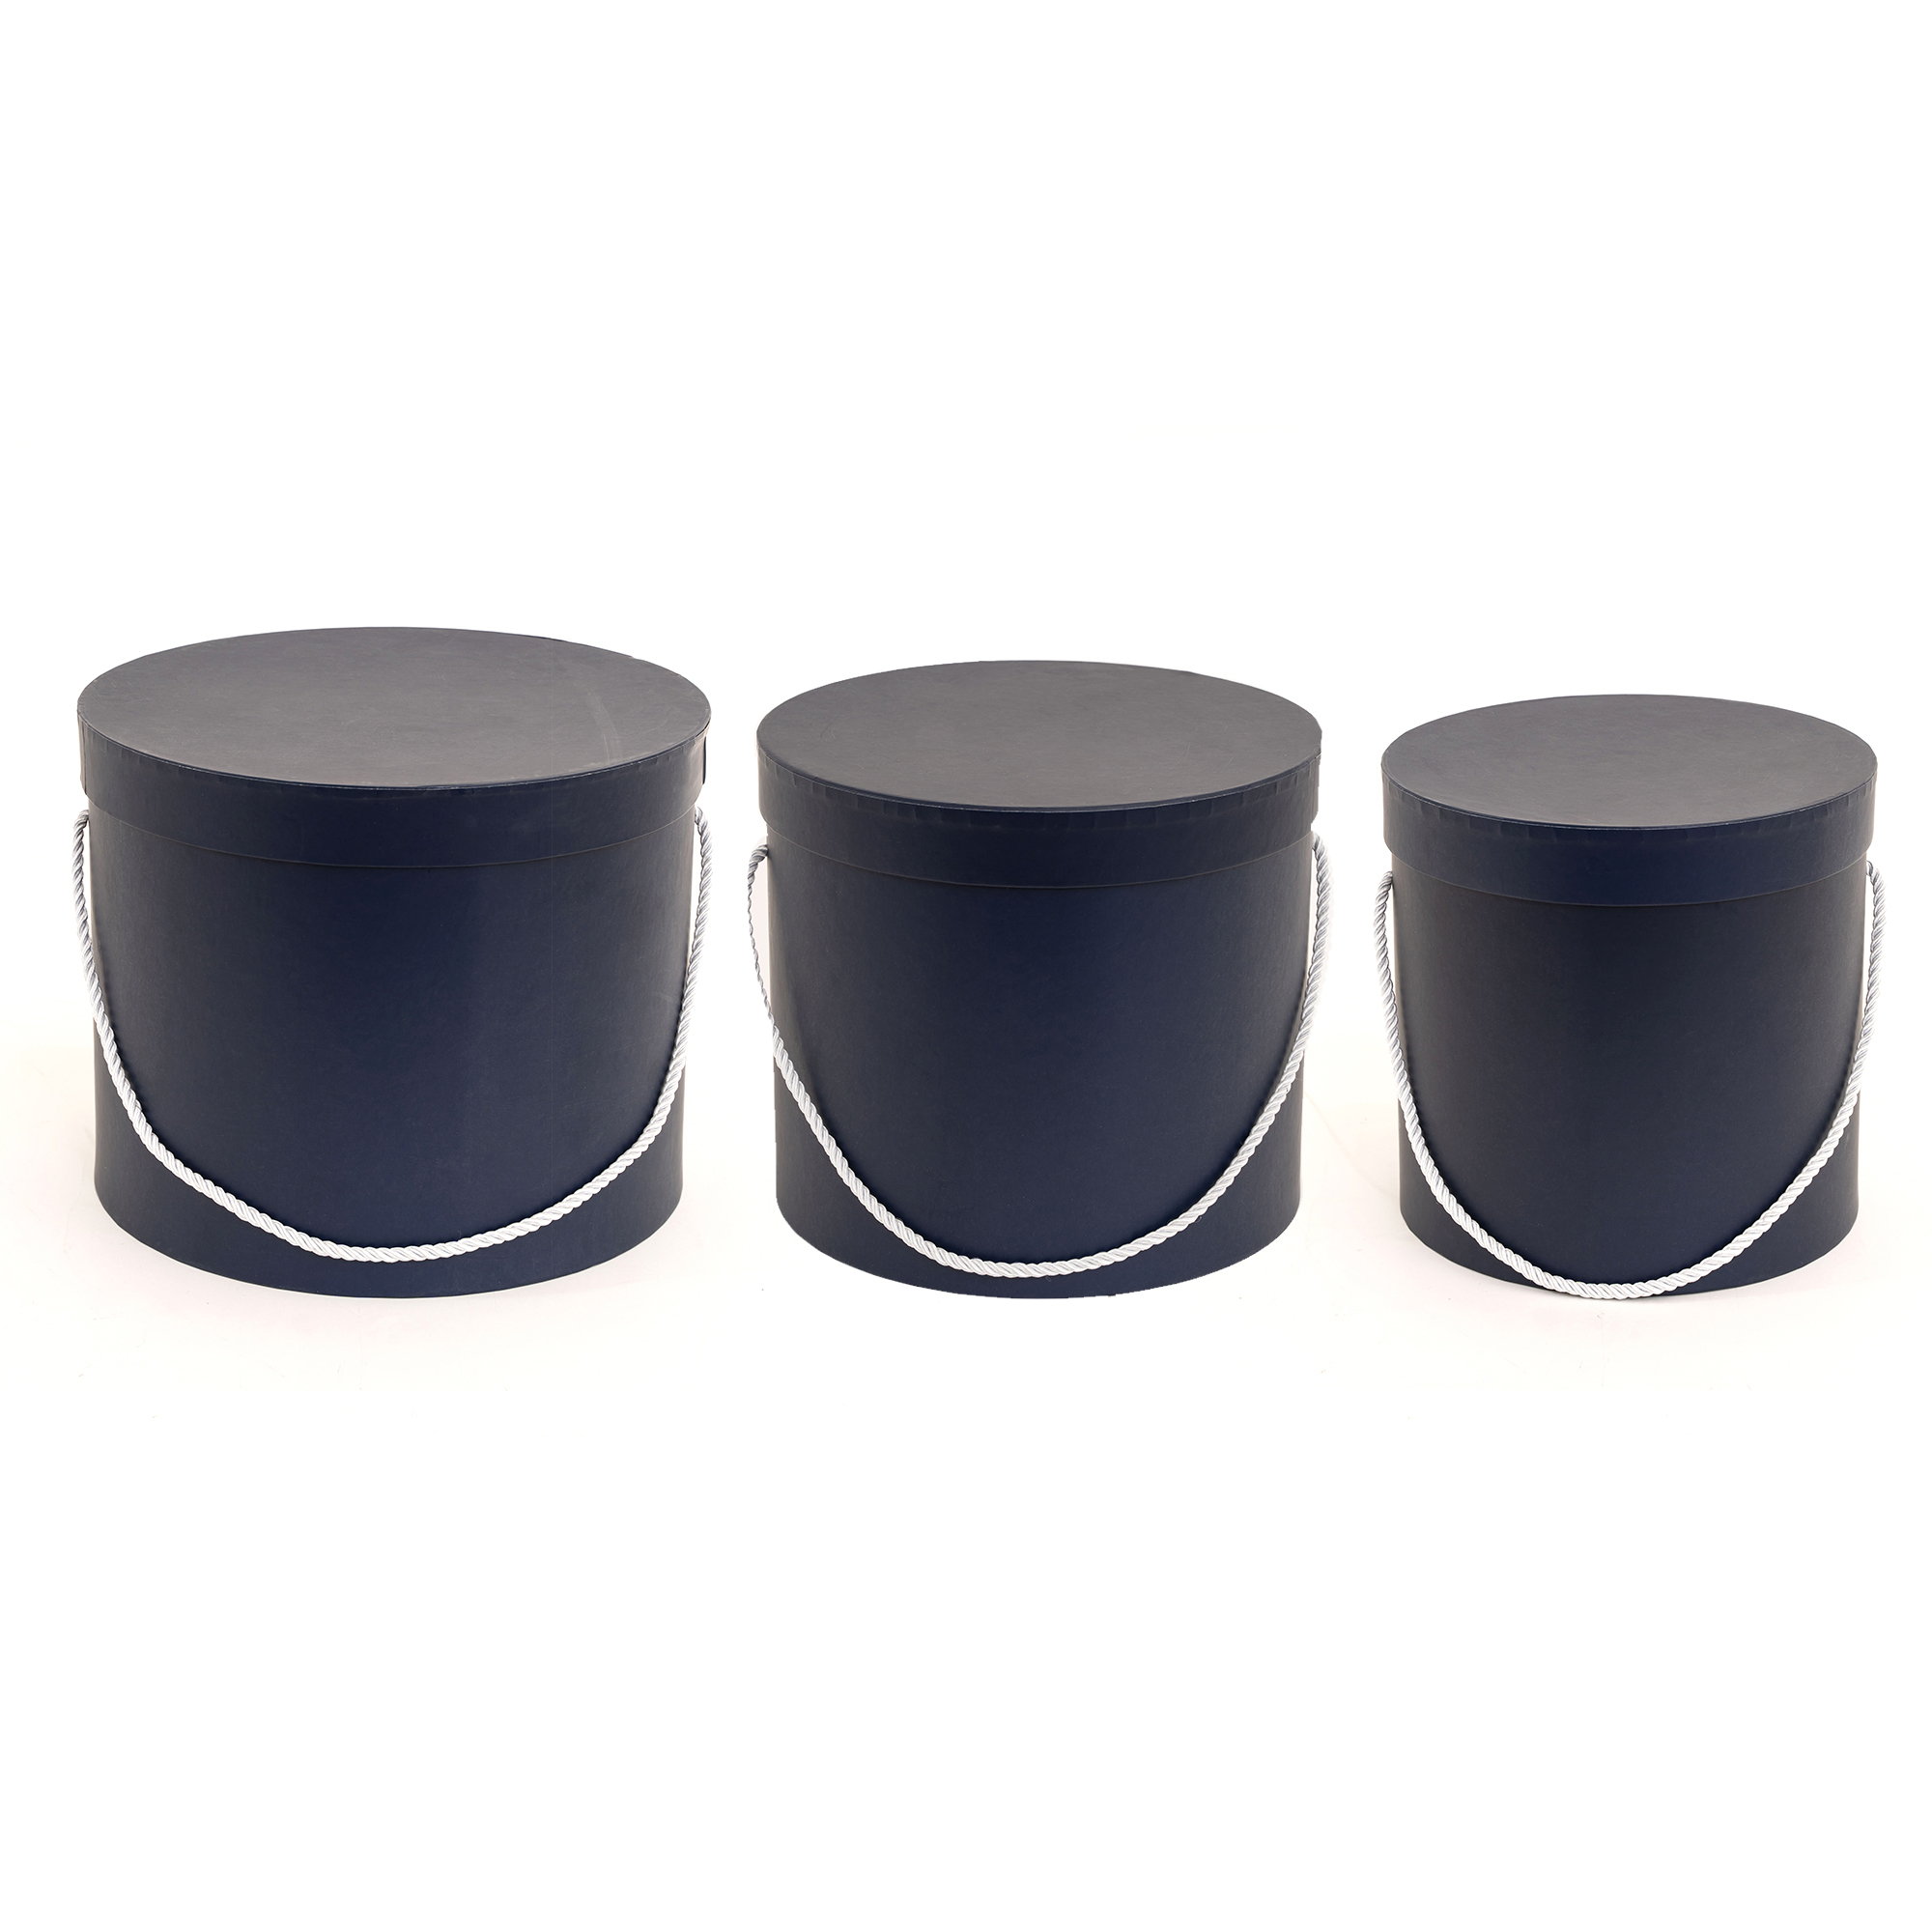 Nested Floral Boxes 3pc/set - All Navy